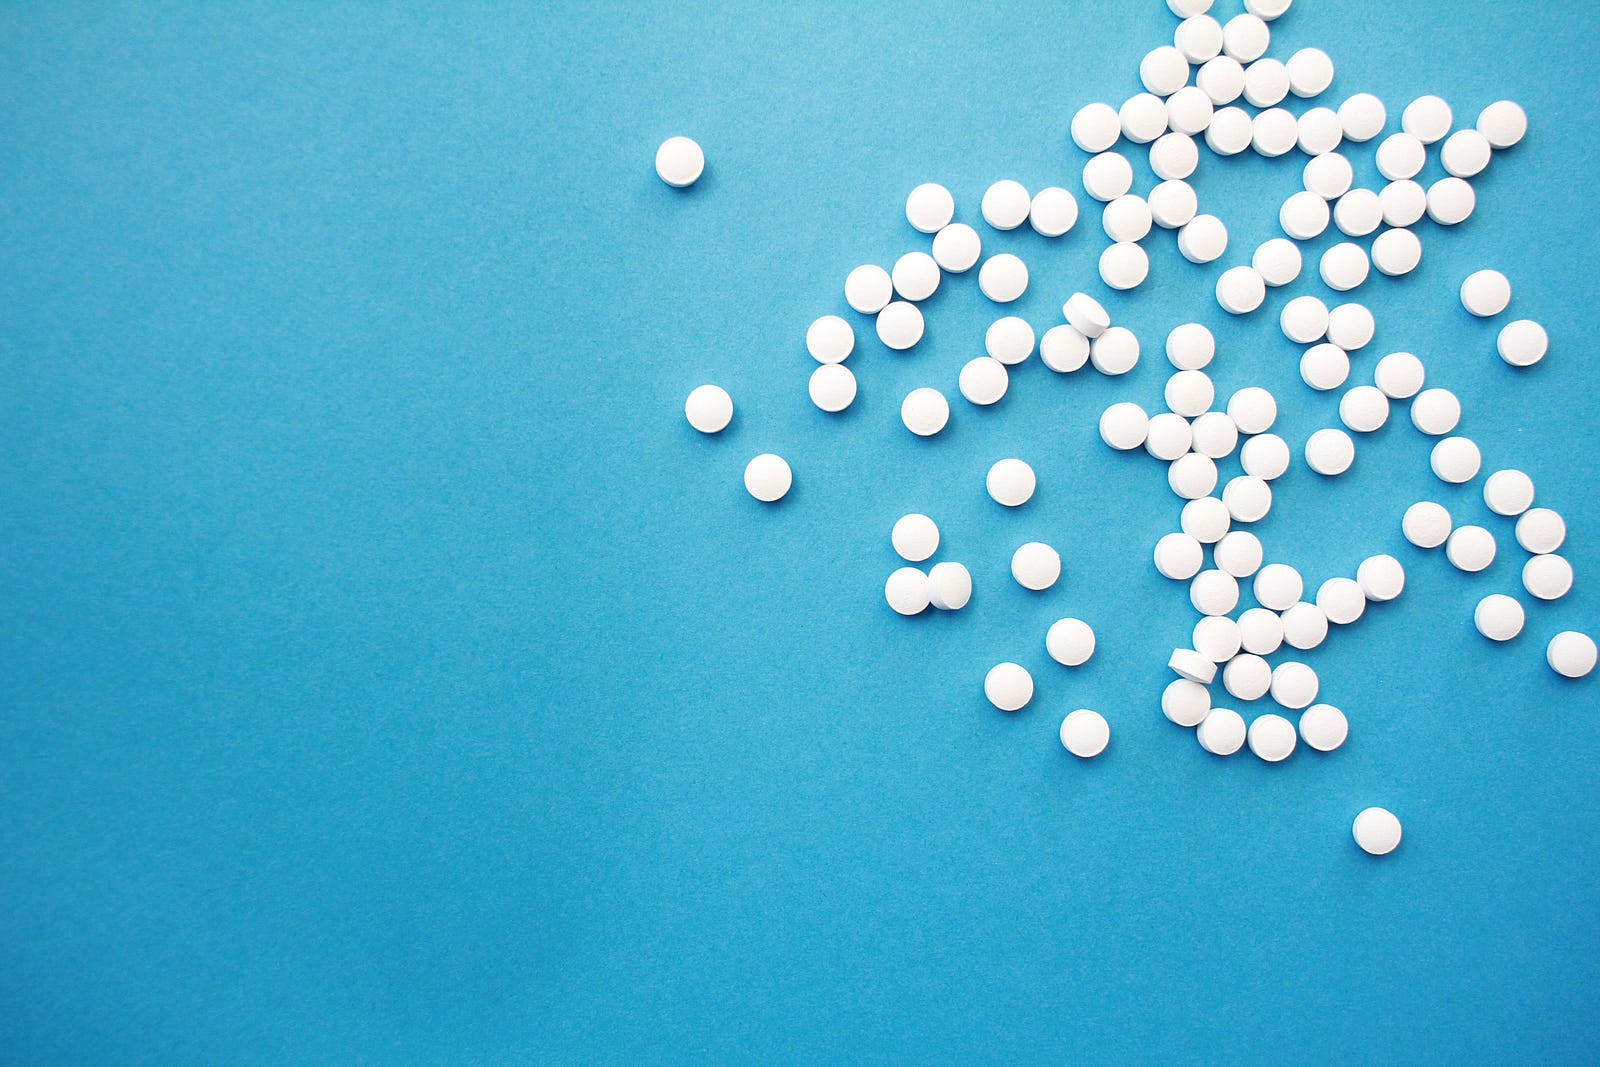 Dozens of white tablets are strewn across a light blue background. Second, a meta-analysis published in The Lancet in 2010 found a one-quarter (24 percent) reduction in colorectal cancer incidence among individuals who took aspirin regularly.